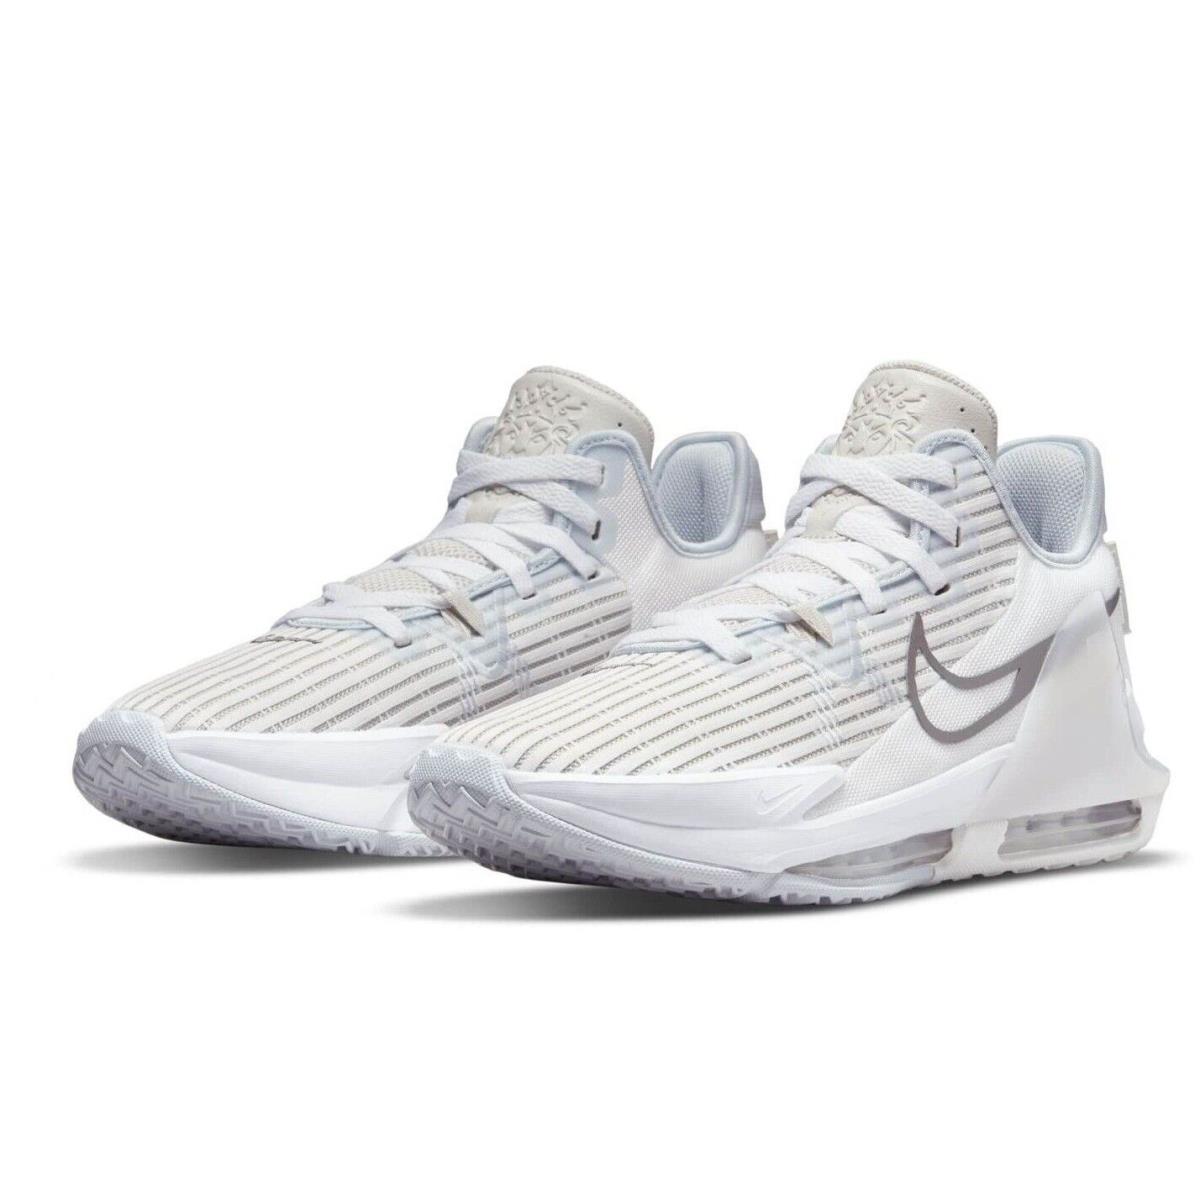 Mens Nike Lebron Witness VI 6 White Silver Basketball Athletic Sneakers Shoes